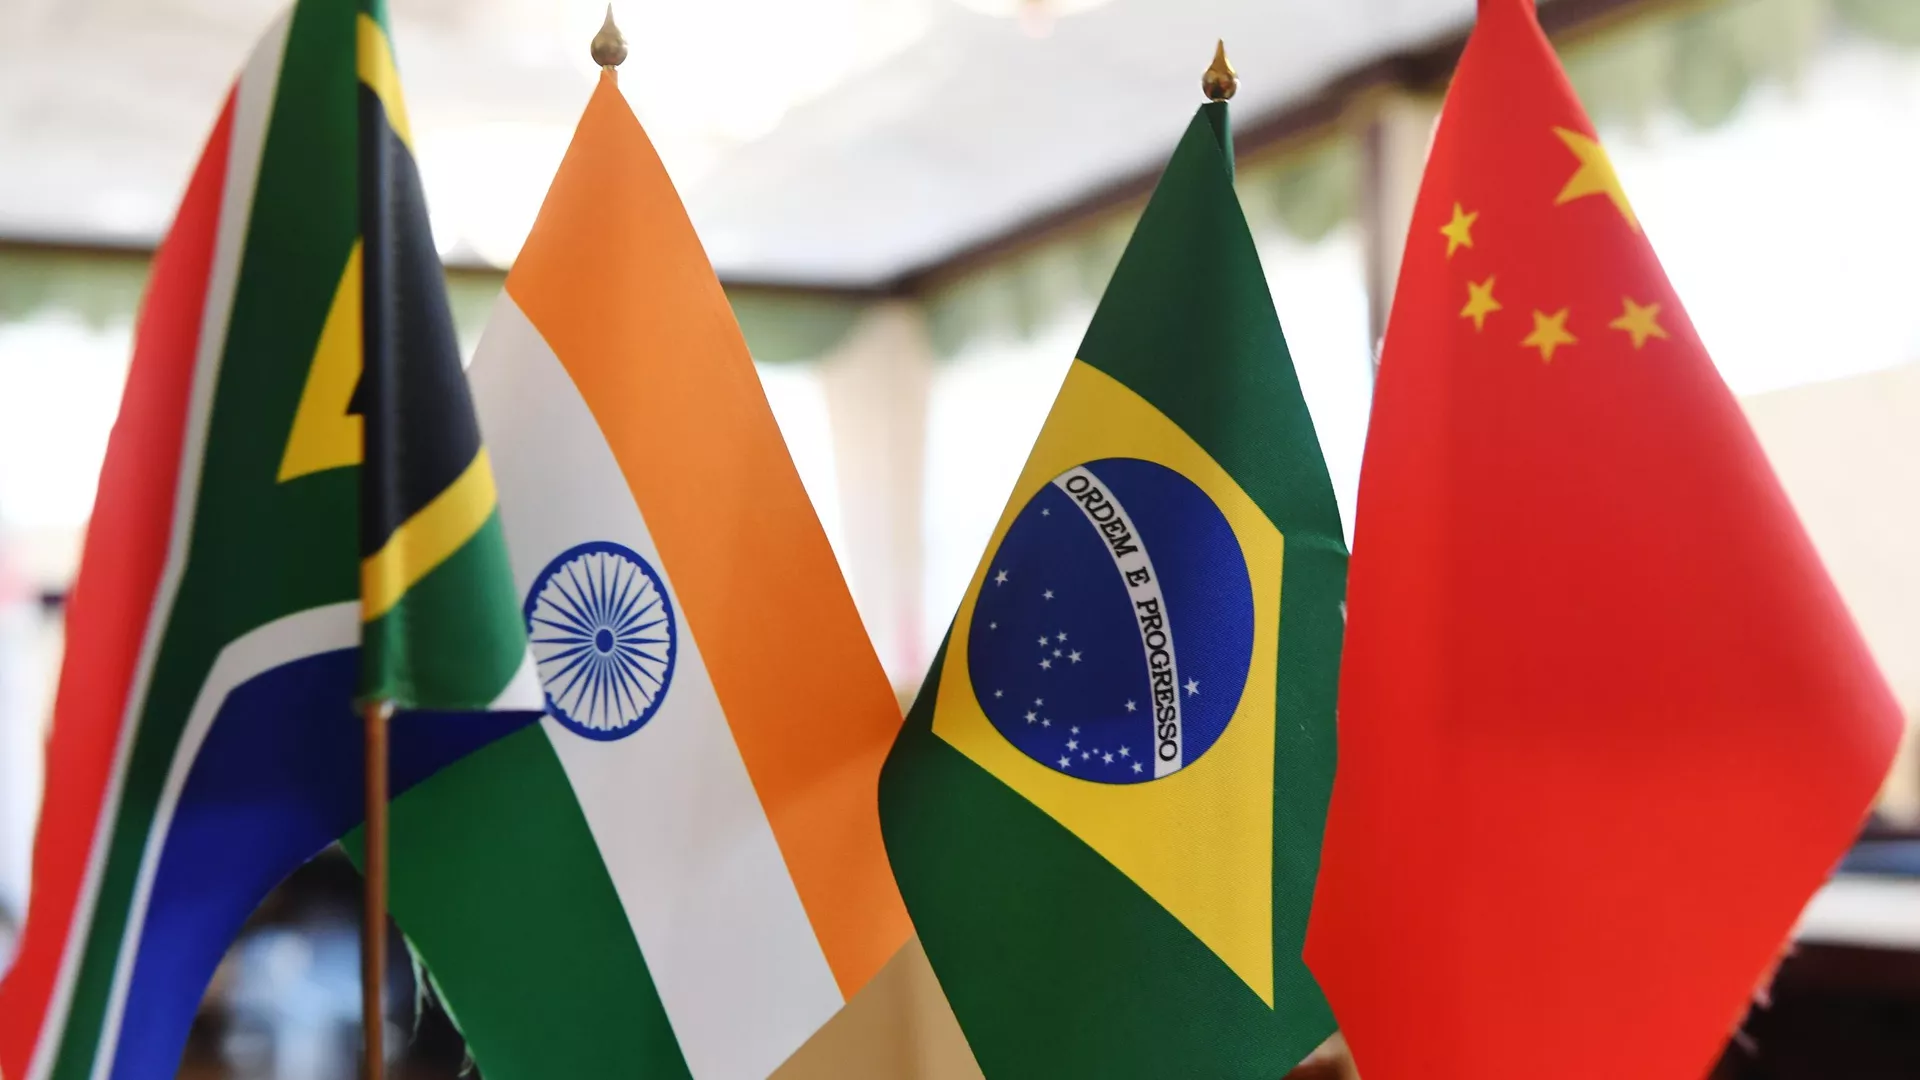 Flags of the BRICS countries: South Africa, India, Brazil and China. - Sputnik Afrique, 1920, 25.04.2023